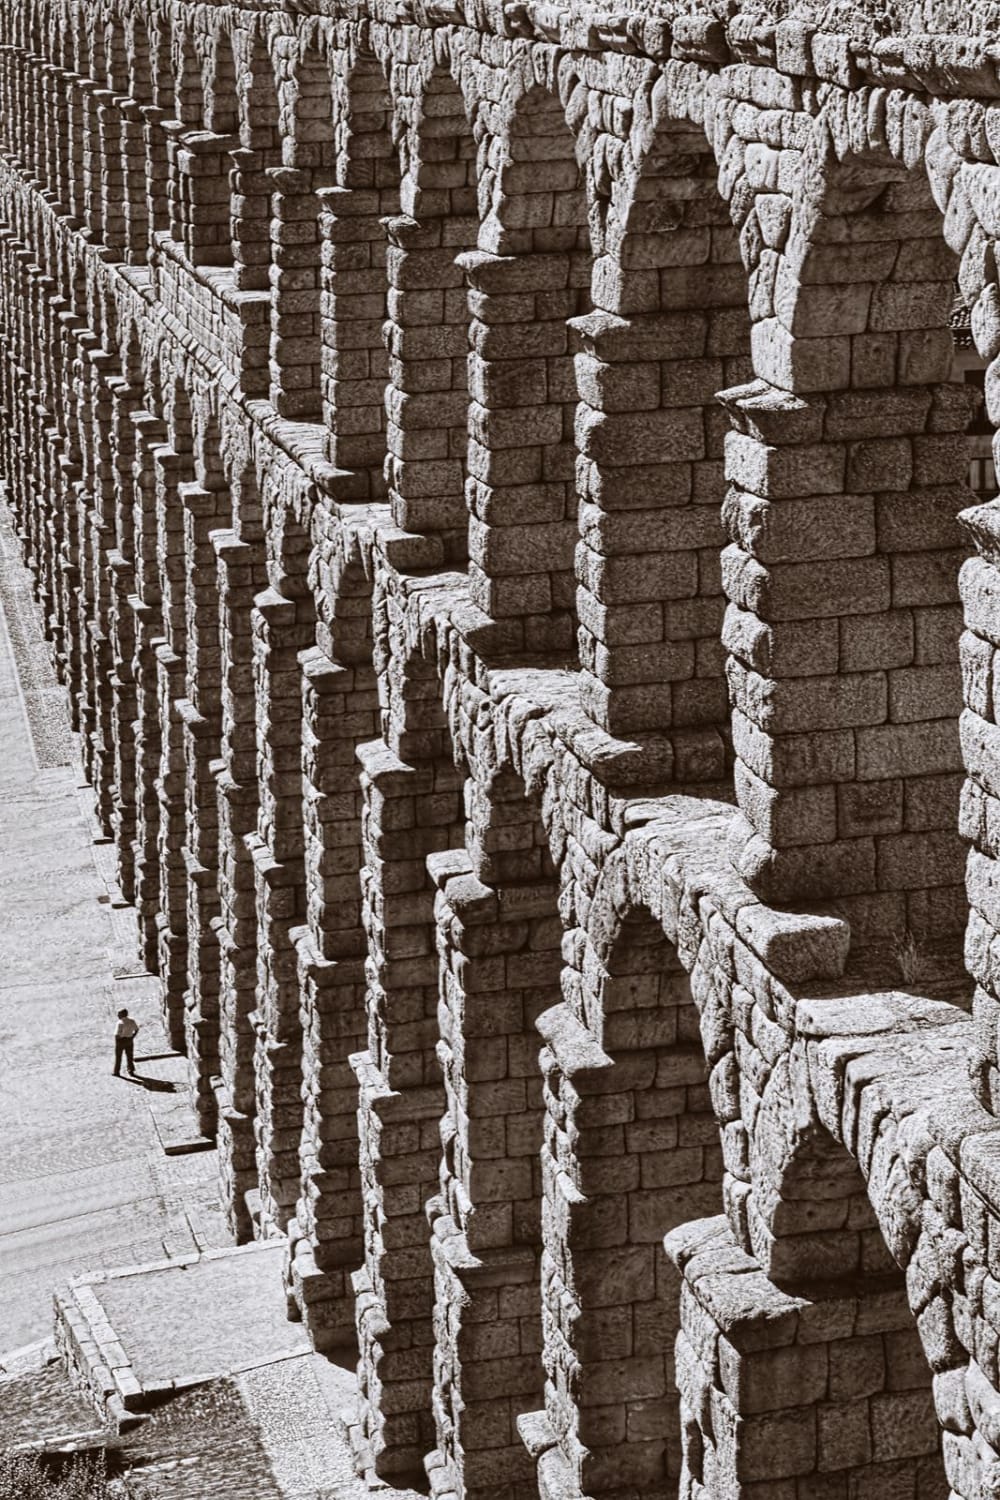 A sense of scale... the Roman aquaduct in Segovia, Spain with one human figure viewed from the top